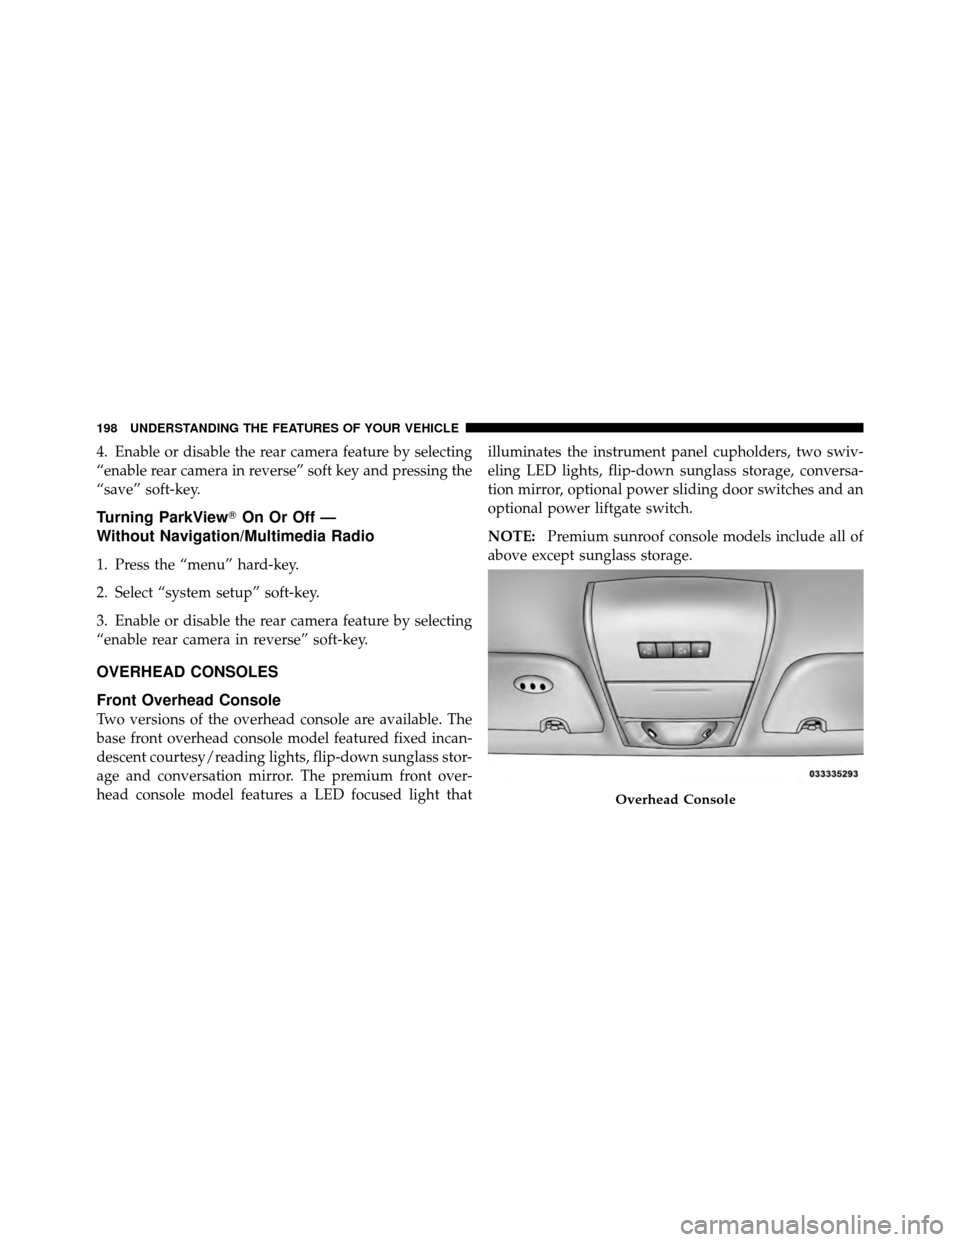 CHRYSLER TOWN AND COUNTRY 2011 5.G Owners Manual 4. Enable or disable the rear camera feature by selecting
“enable rear camera in reverse” soft key and pressing the
“save” soft-key.
Turning ParkViewOn Or Off —
Without Navigation/Multimedi